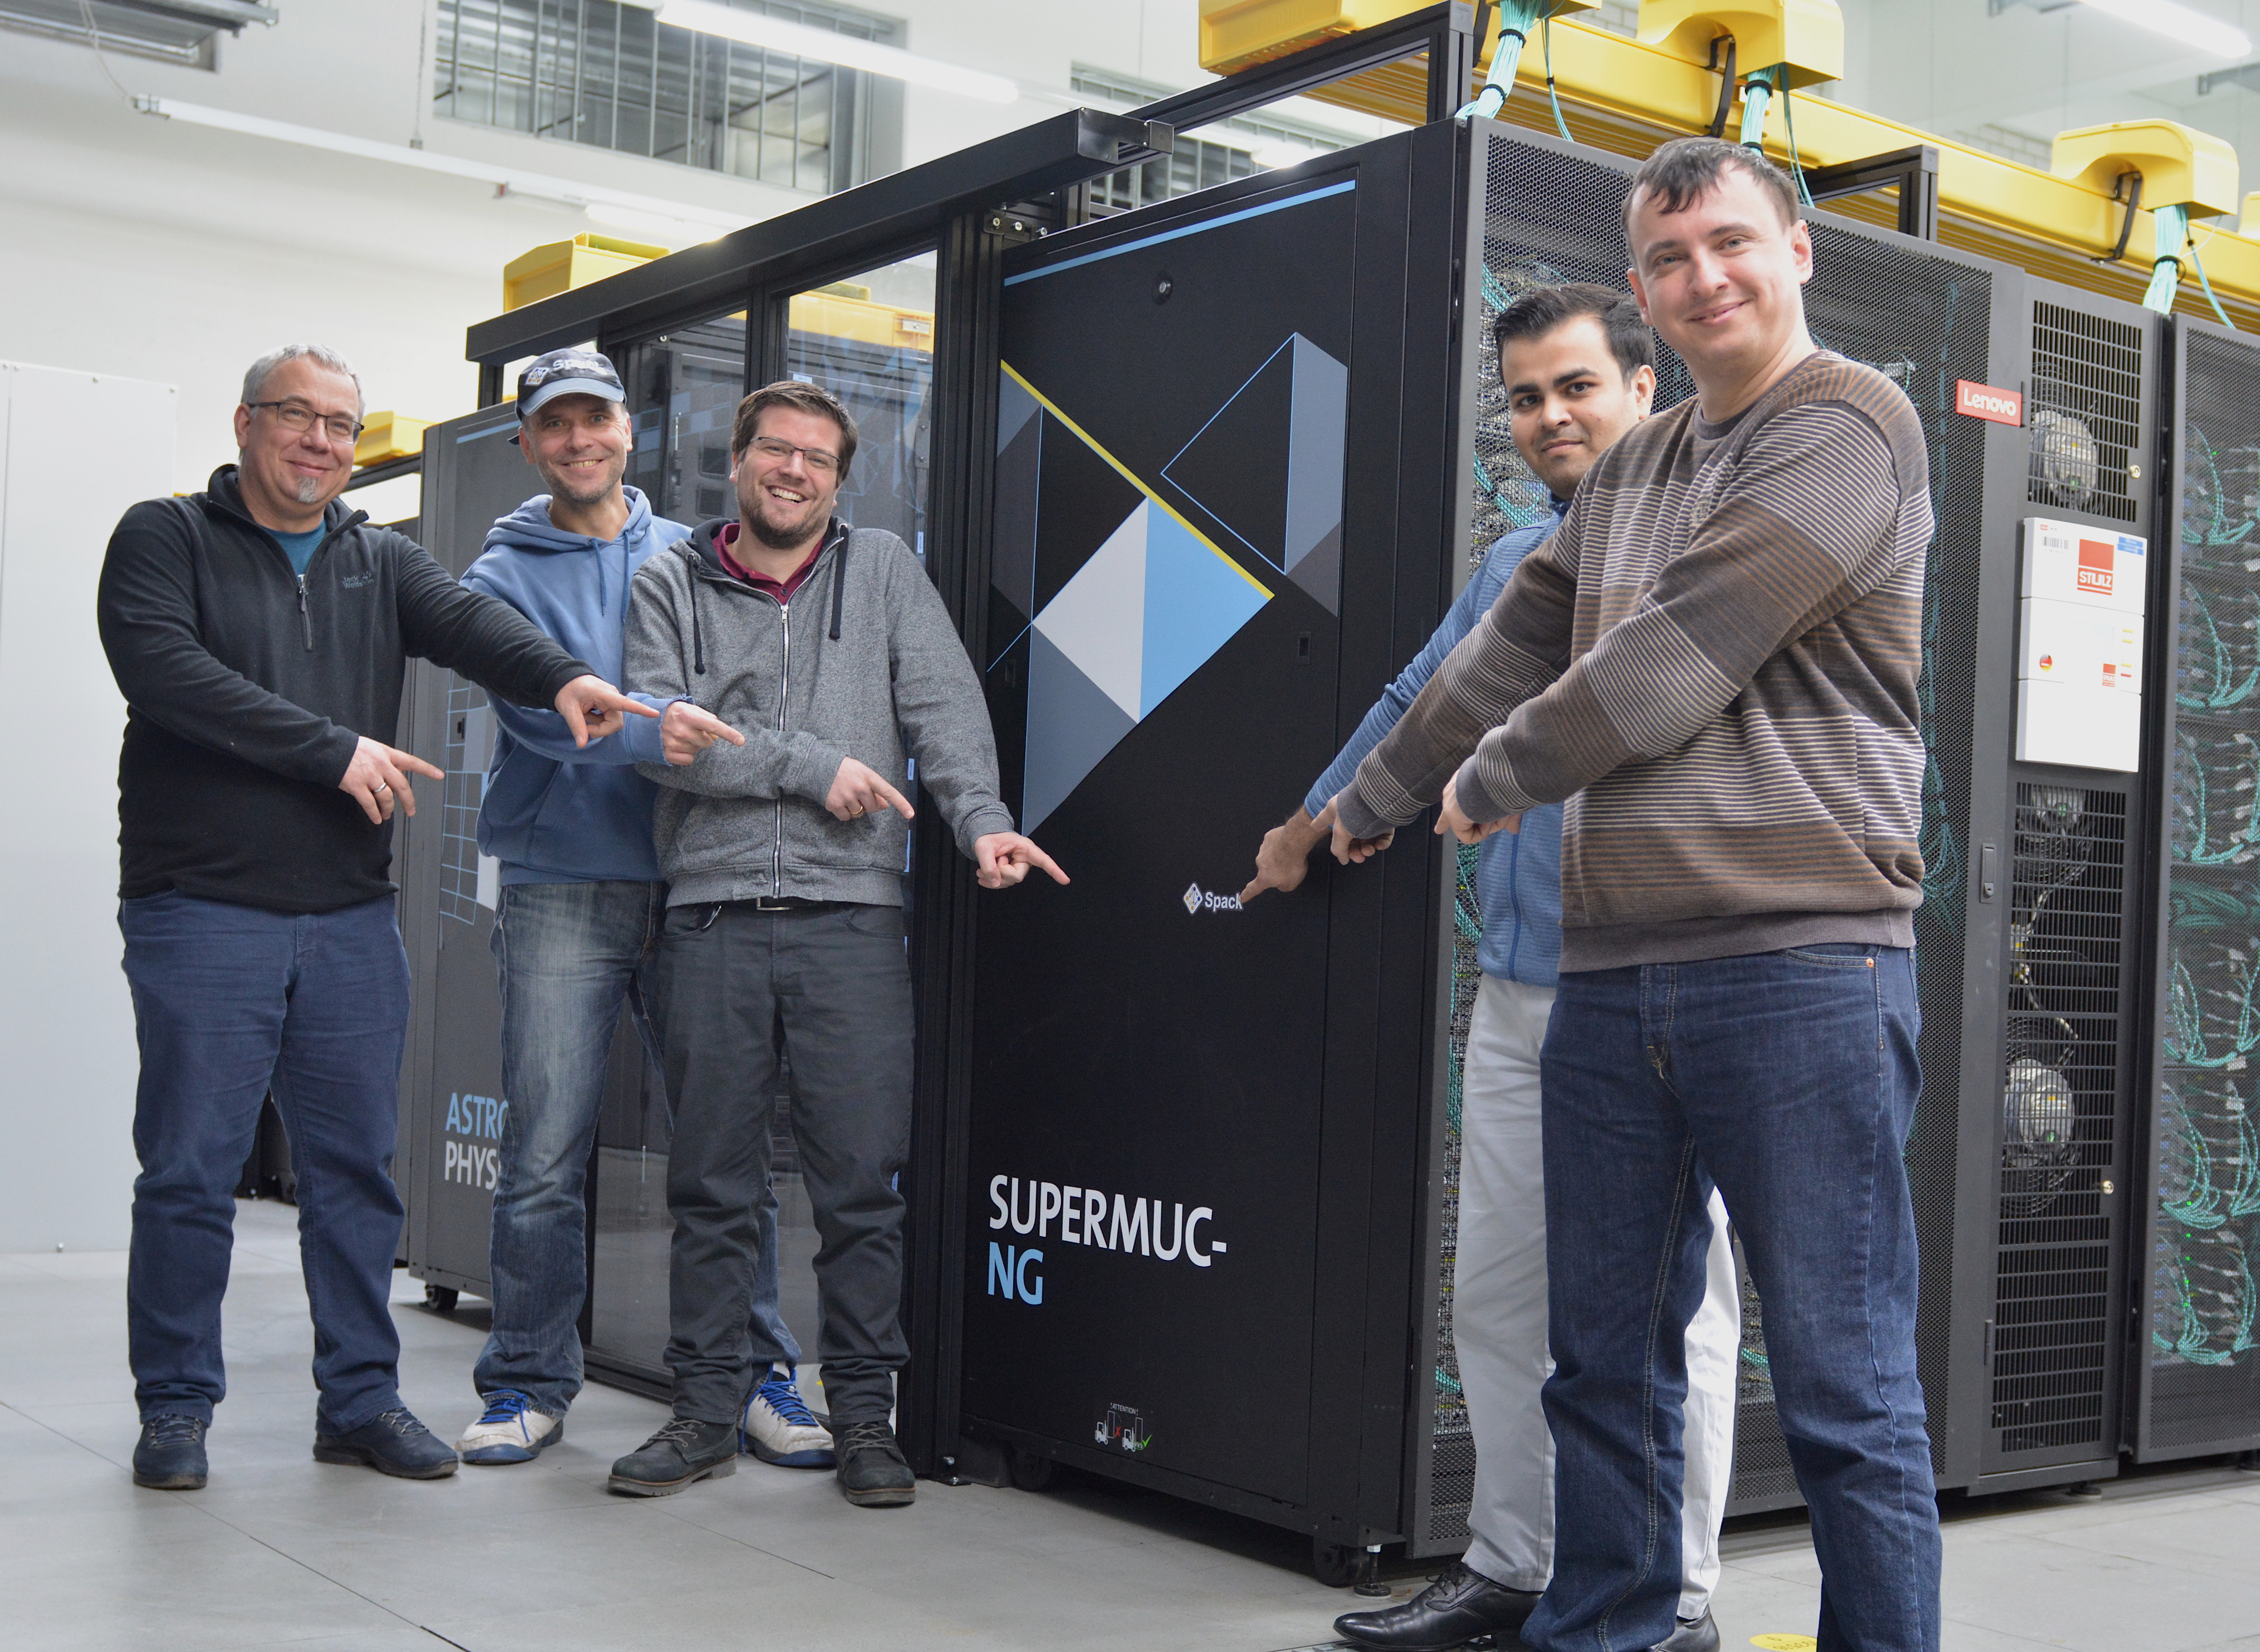 Members of the LRZ Spack team in front of SuperMUC-NG and pointing
at a Spack sticker placed on the rack front.